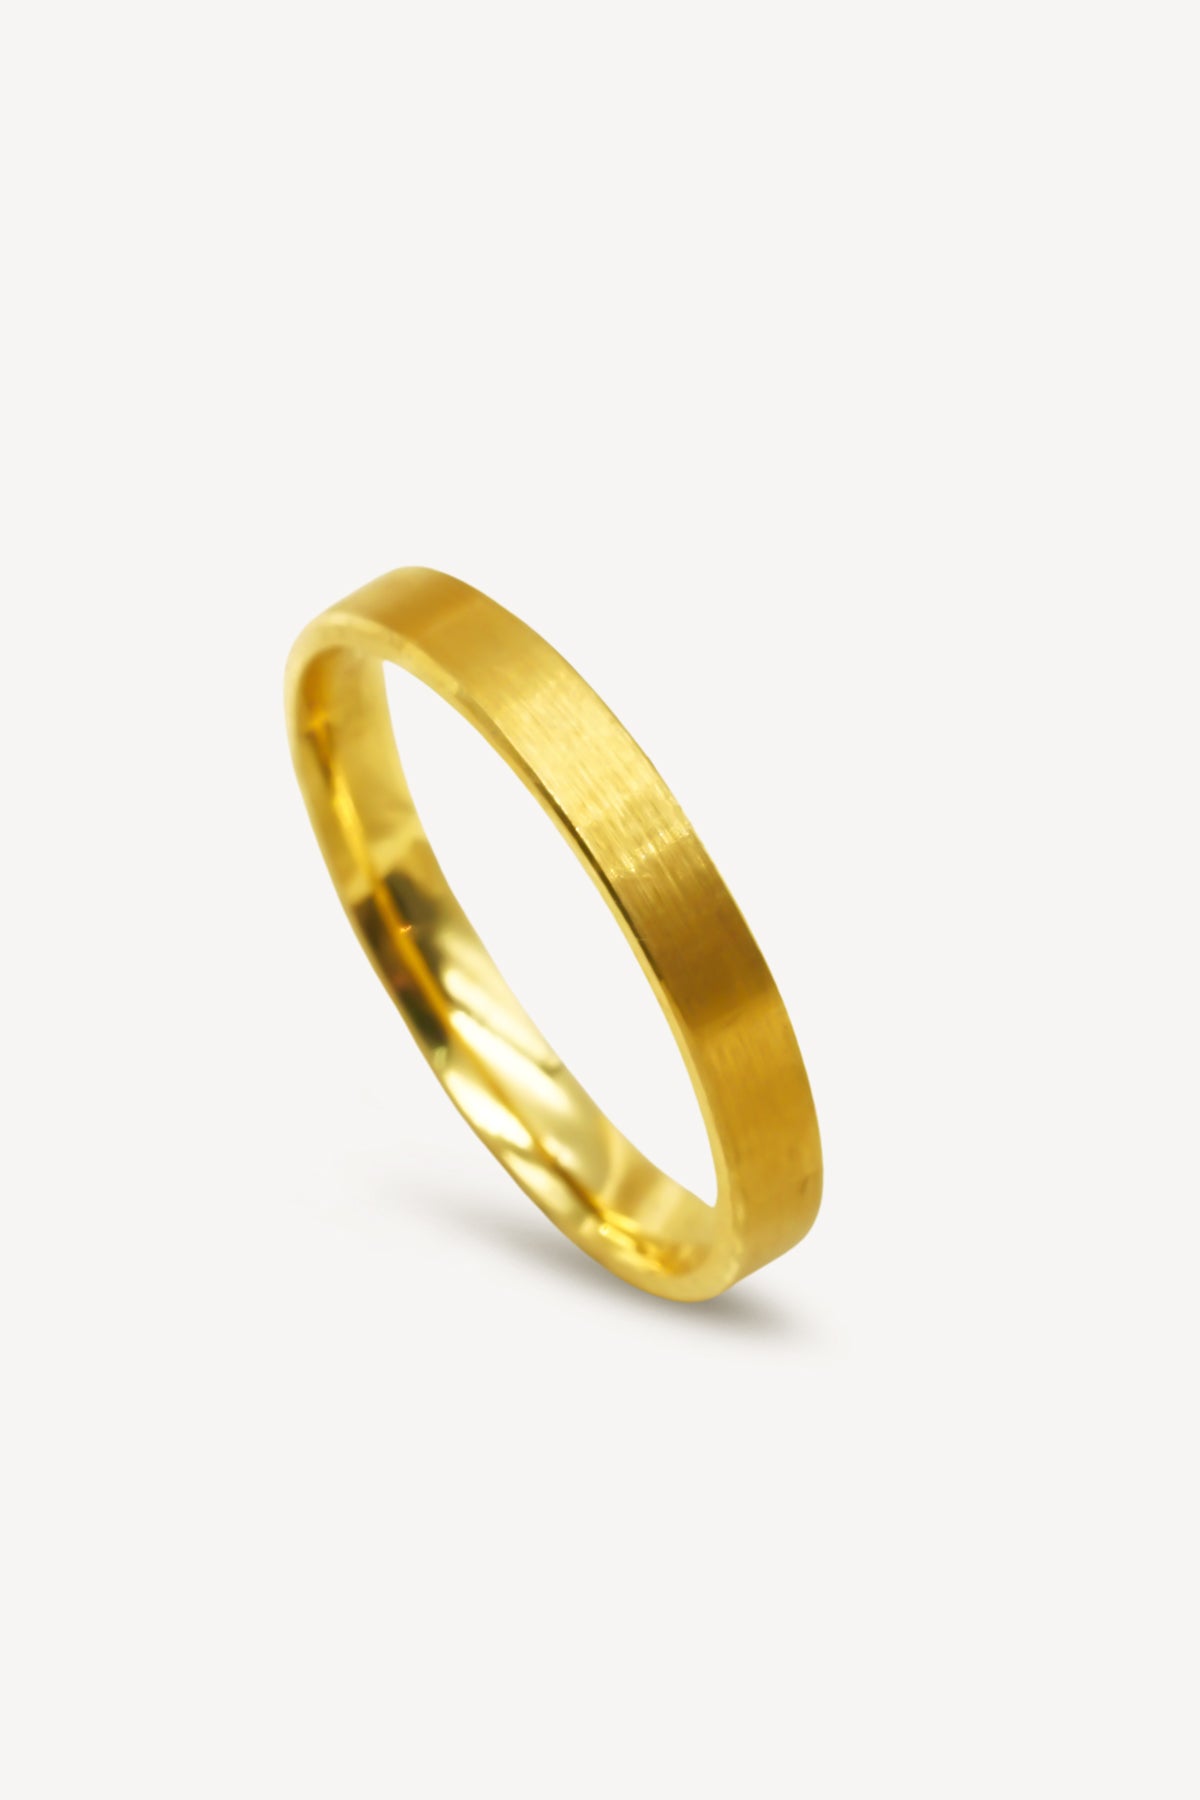 HSD Personality Ring Design Ring Geometric Shape Square Ring Adjustable  Winding Ring Minimalist Ring Gift Girls Rings Ages 8-12 (Gold, A) :  Amazon.co.uk: Fashion